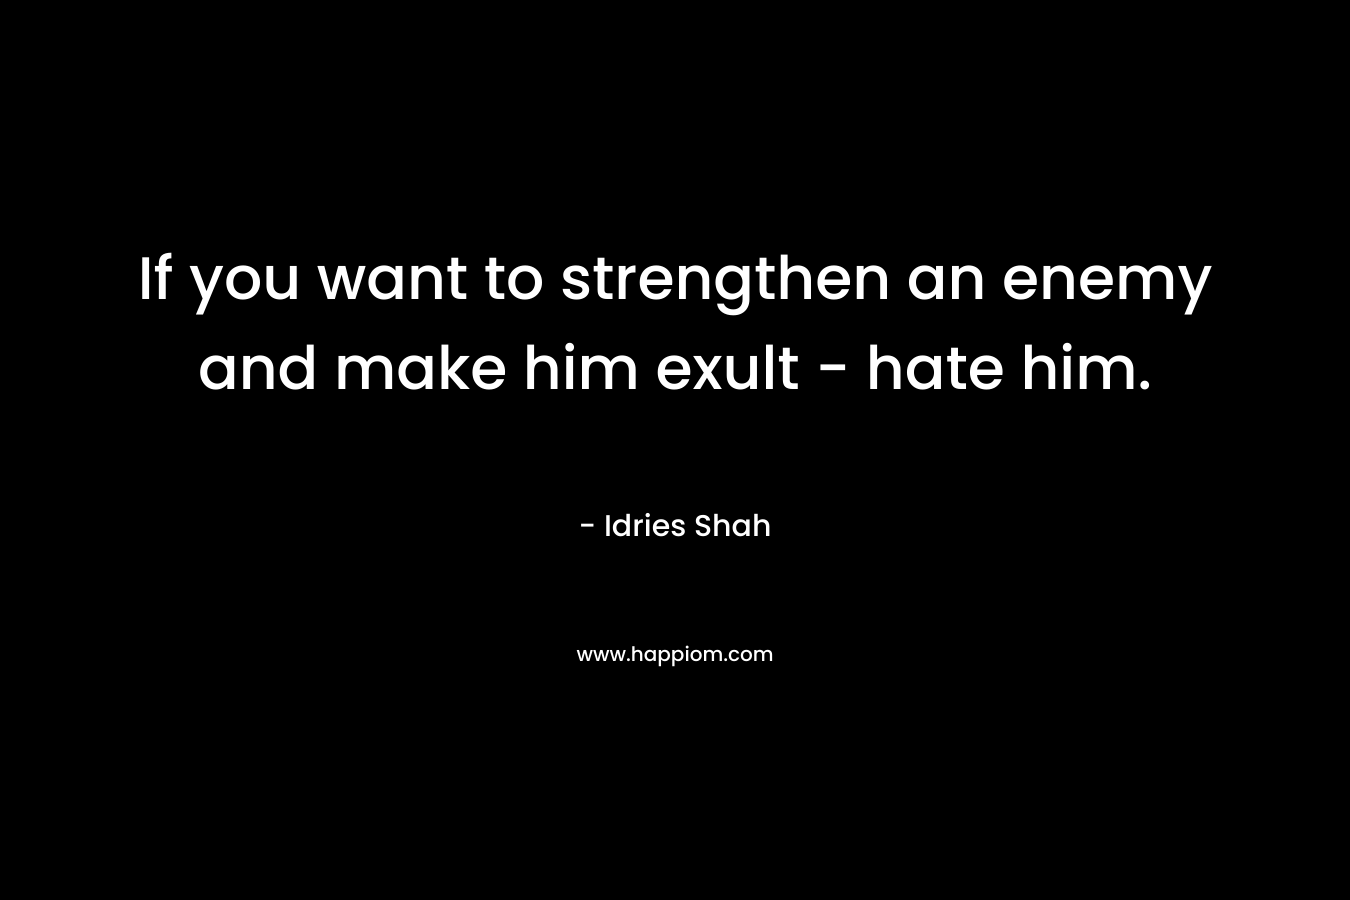 If you want to strengthen an enemy and make him exult – hate him. – Idries Shah